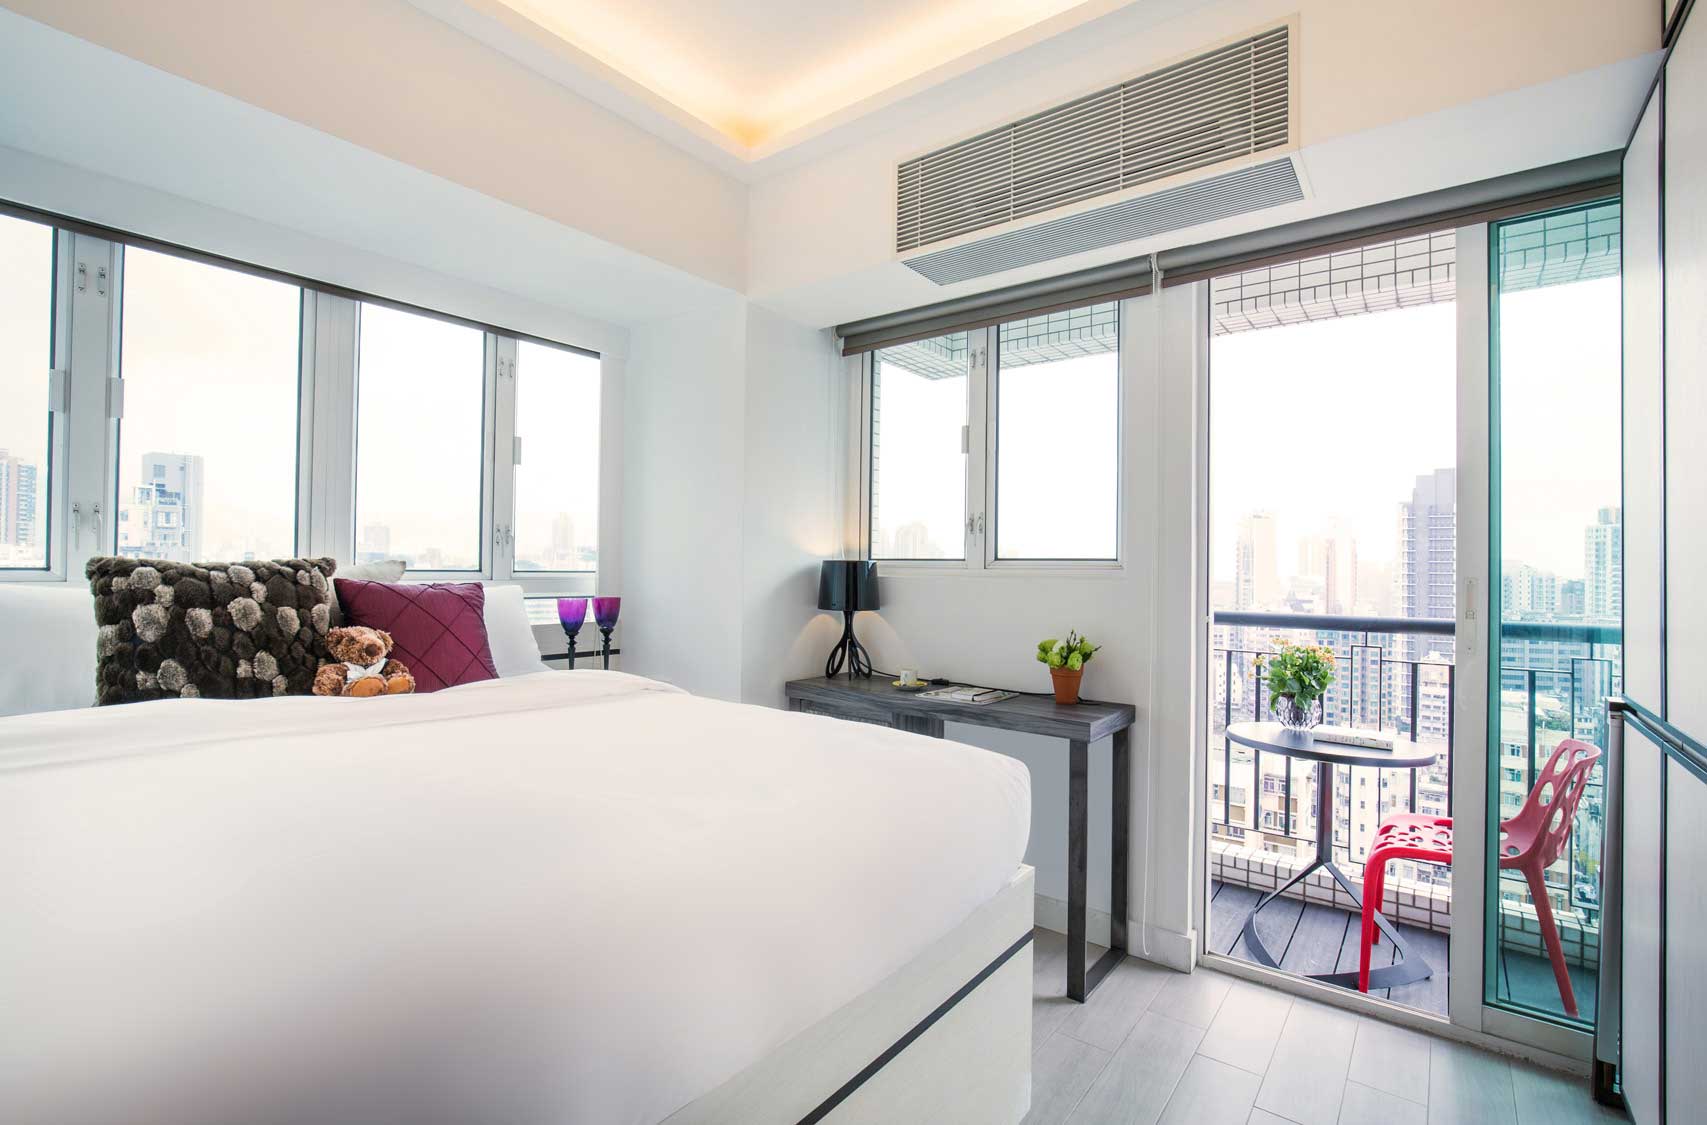 The V studio with Balcony at The Lodge serviced apartment in Jordan, West Kowloon